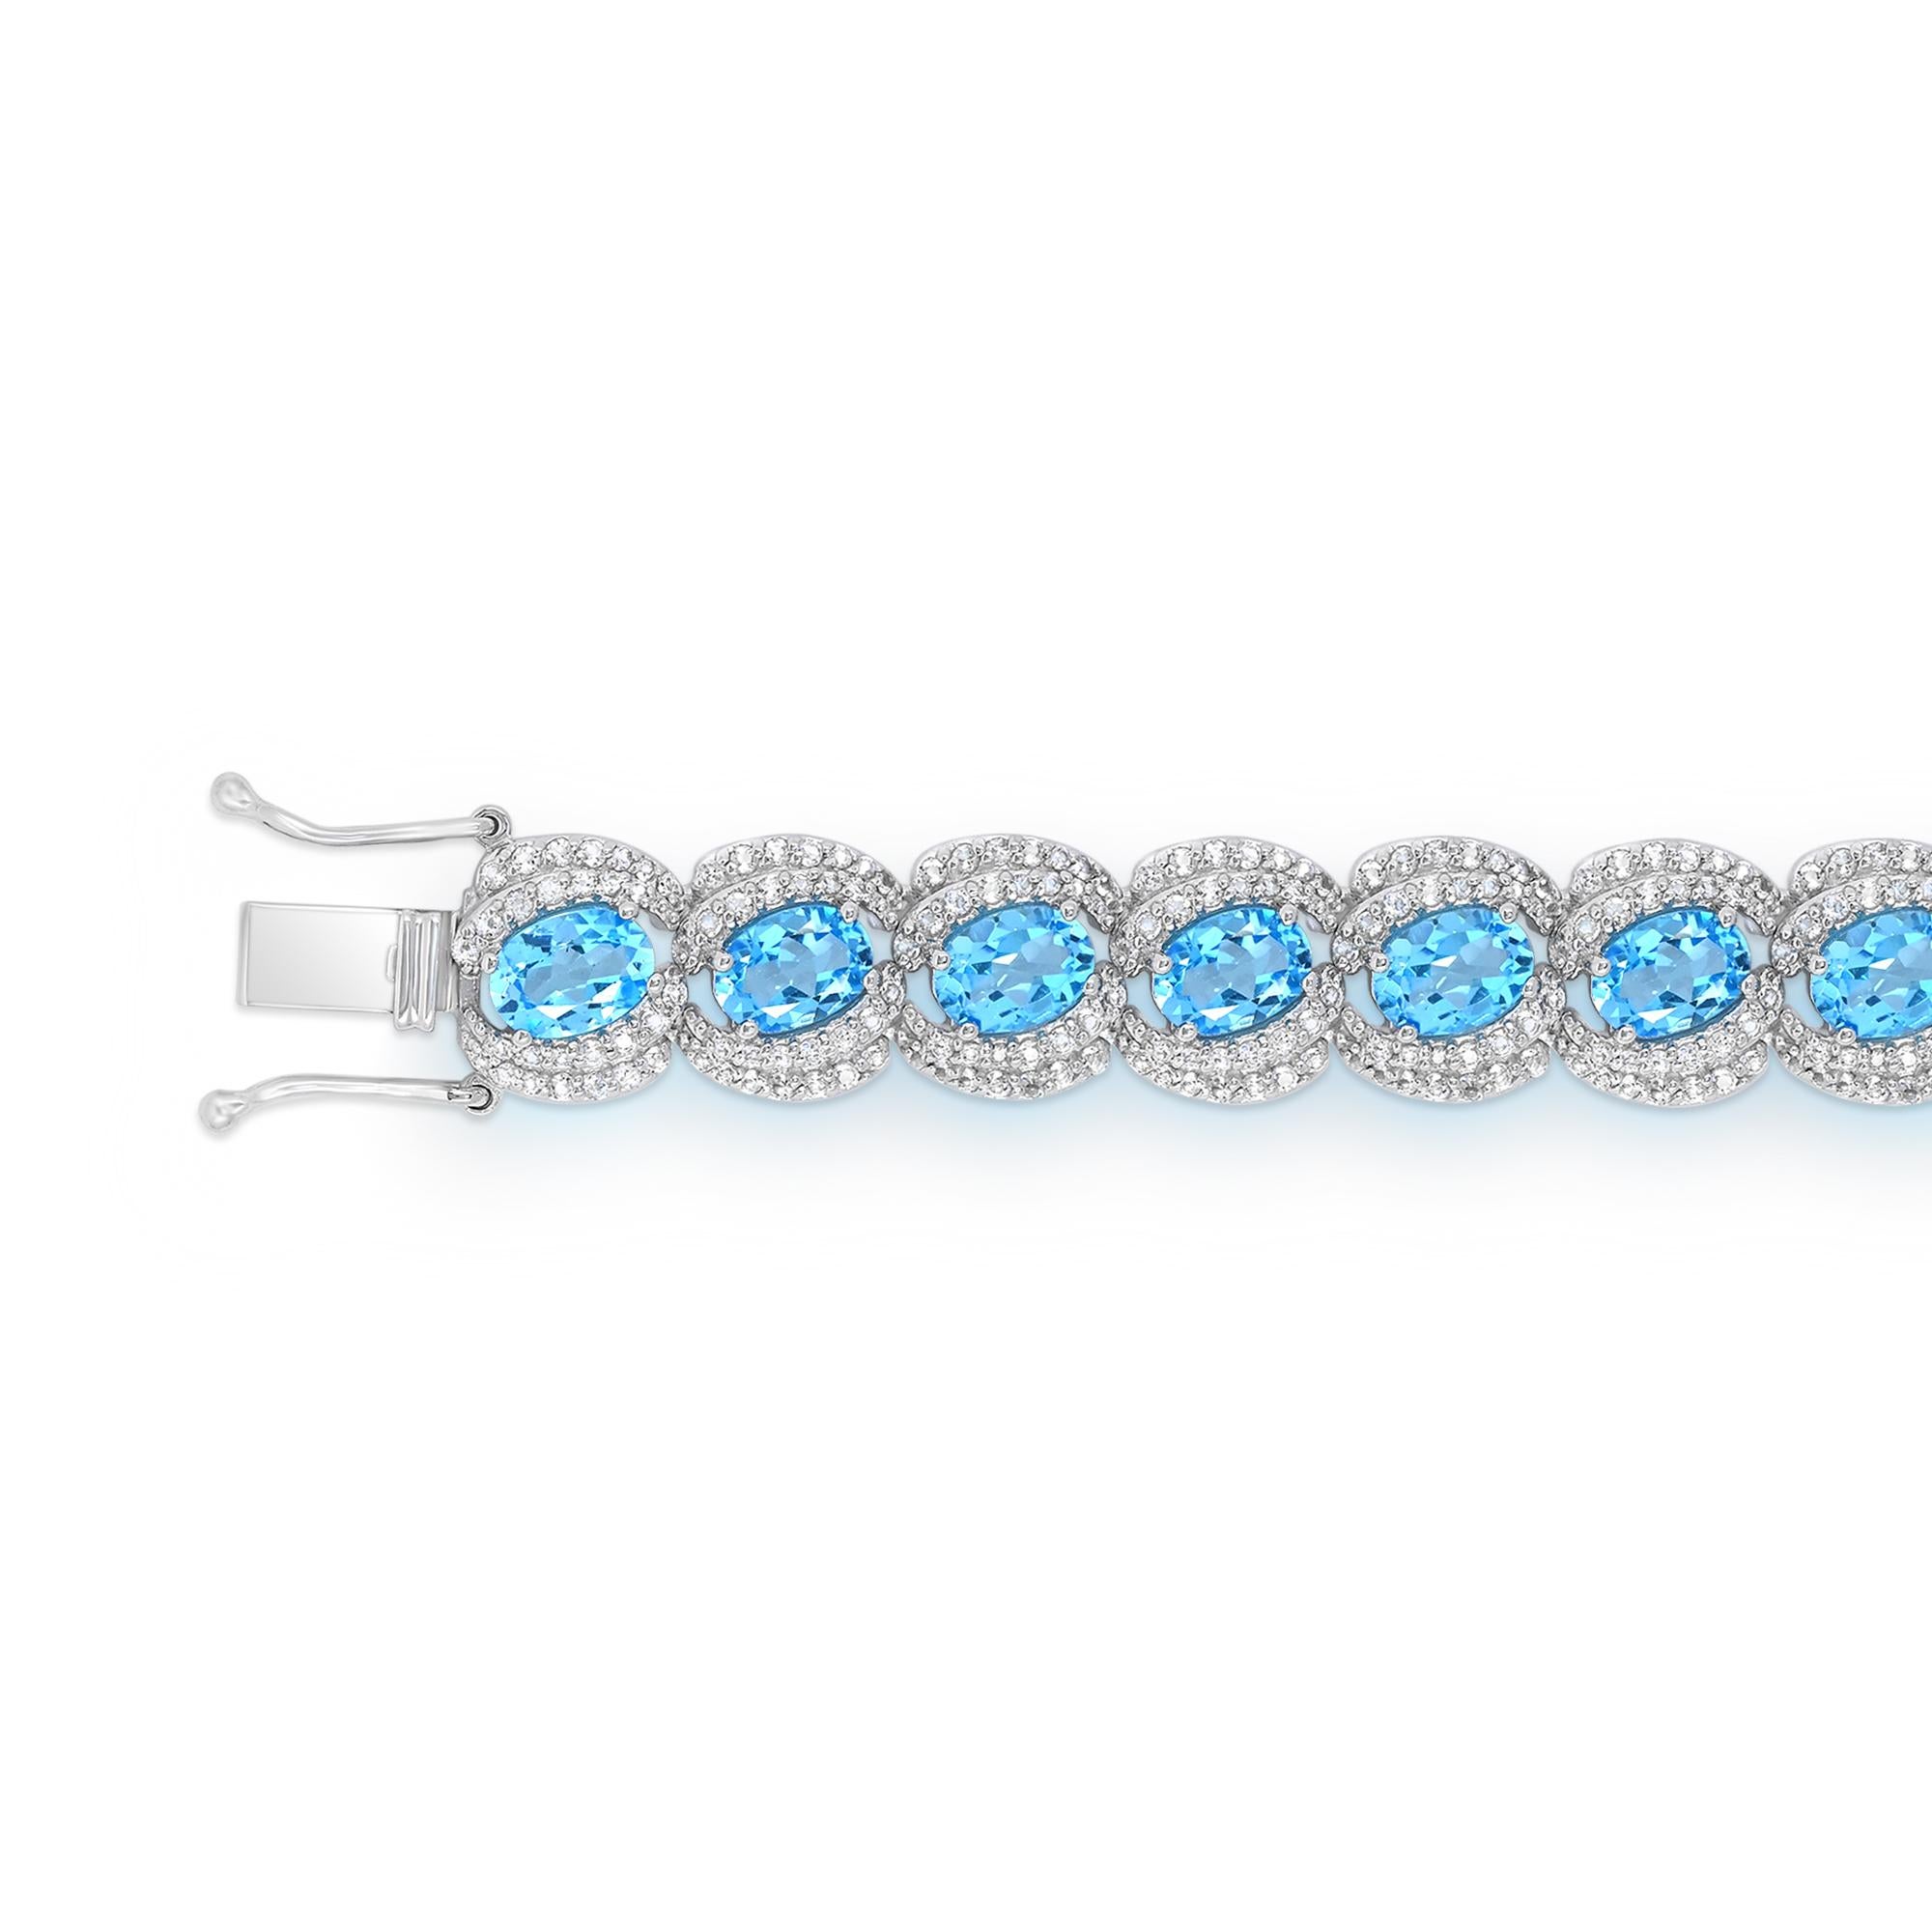 Oval Cut 27-1/3 Carat Oval Swiss Blue Topaz and White Topaz Bracelet in Sterling Silver For Sale